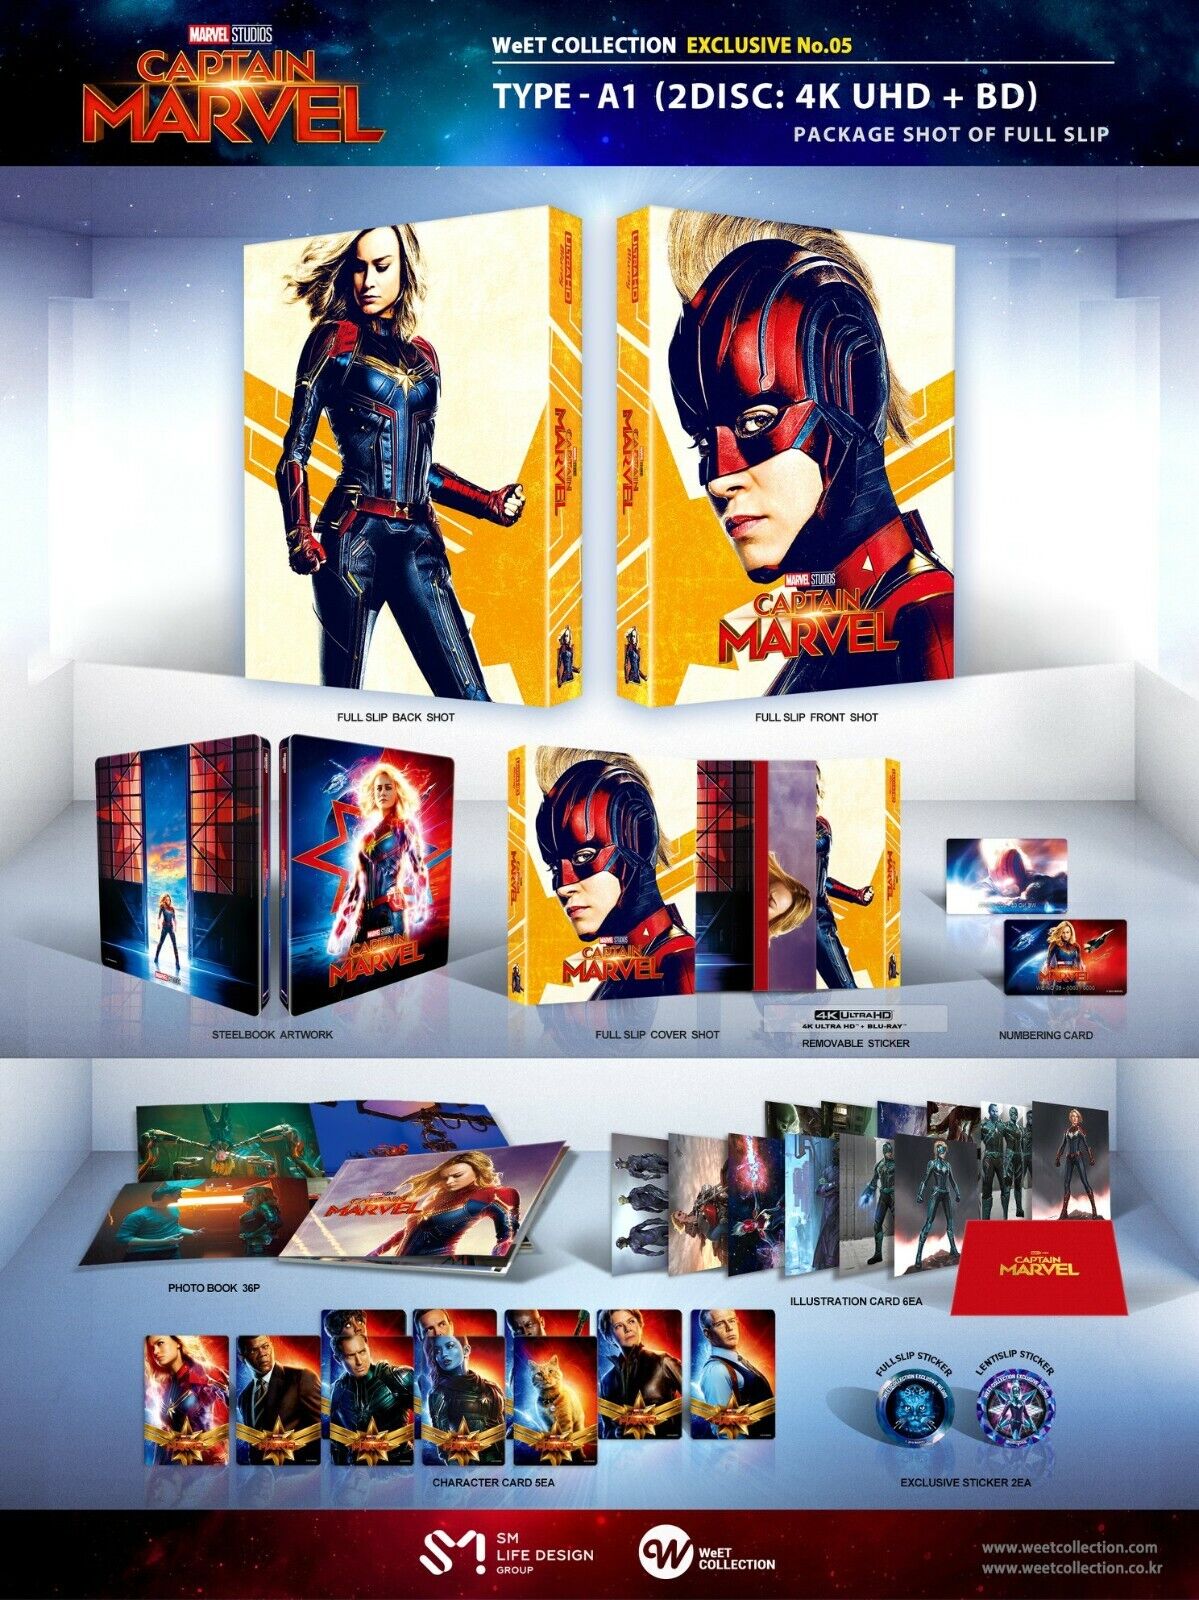 Captain Marvel 4K +2D Blu-ray Steelbook WeET Collection Exclusive #5 Full Slip A1